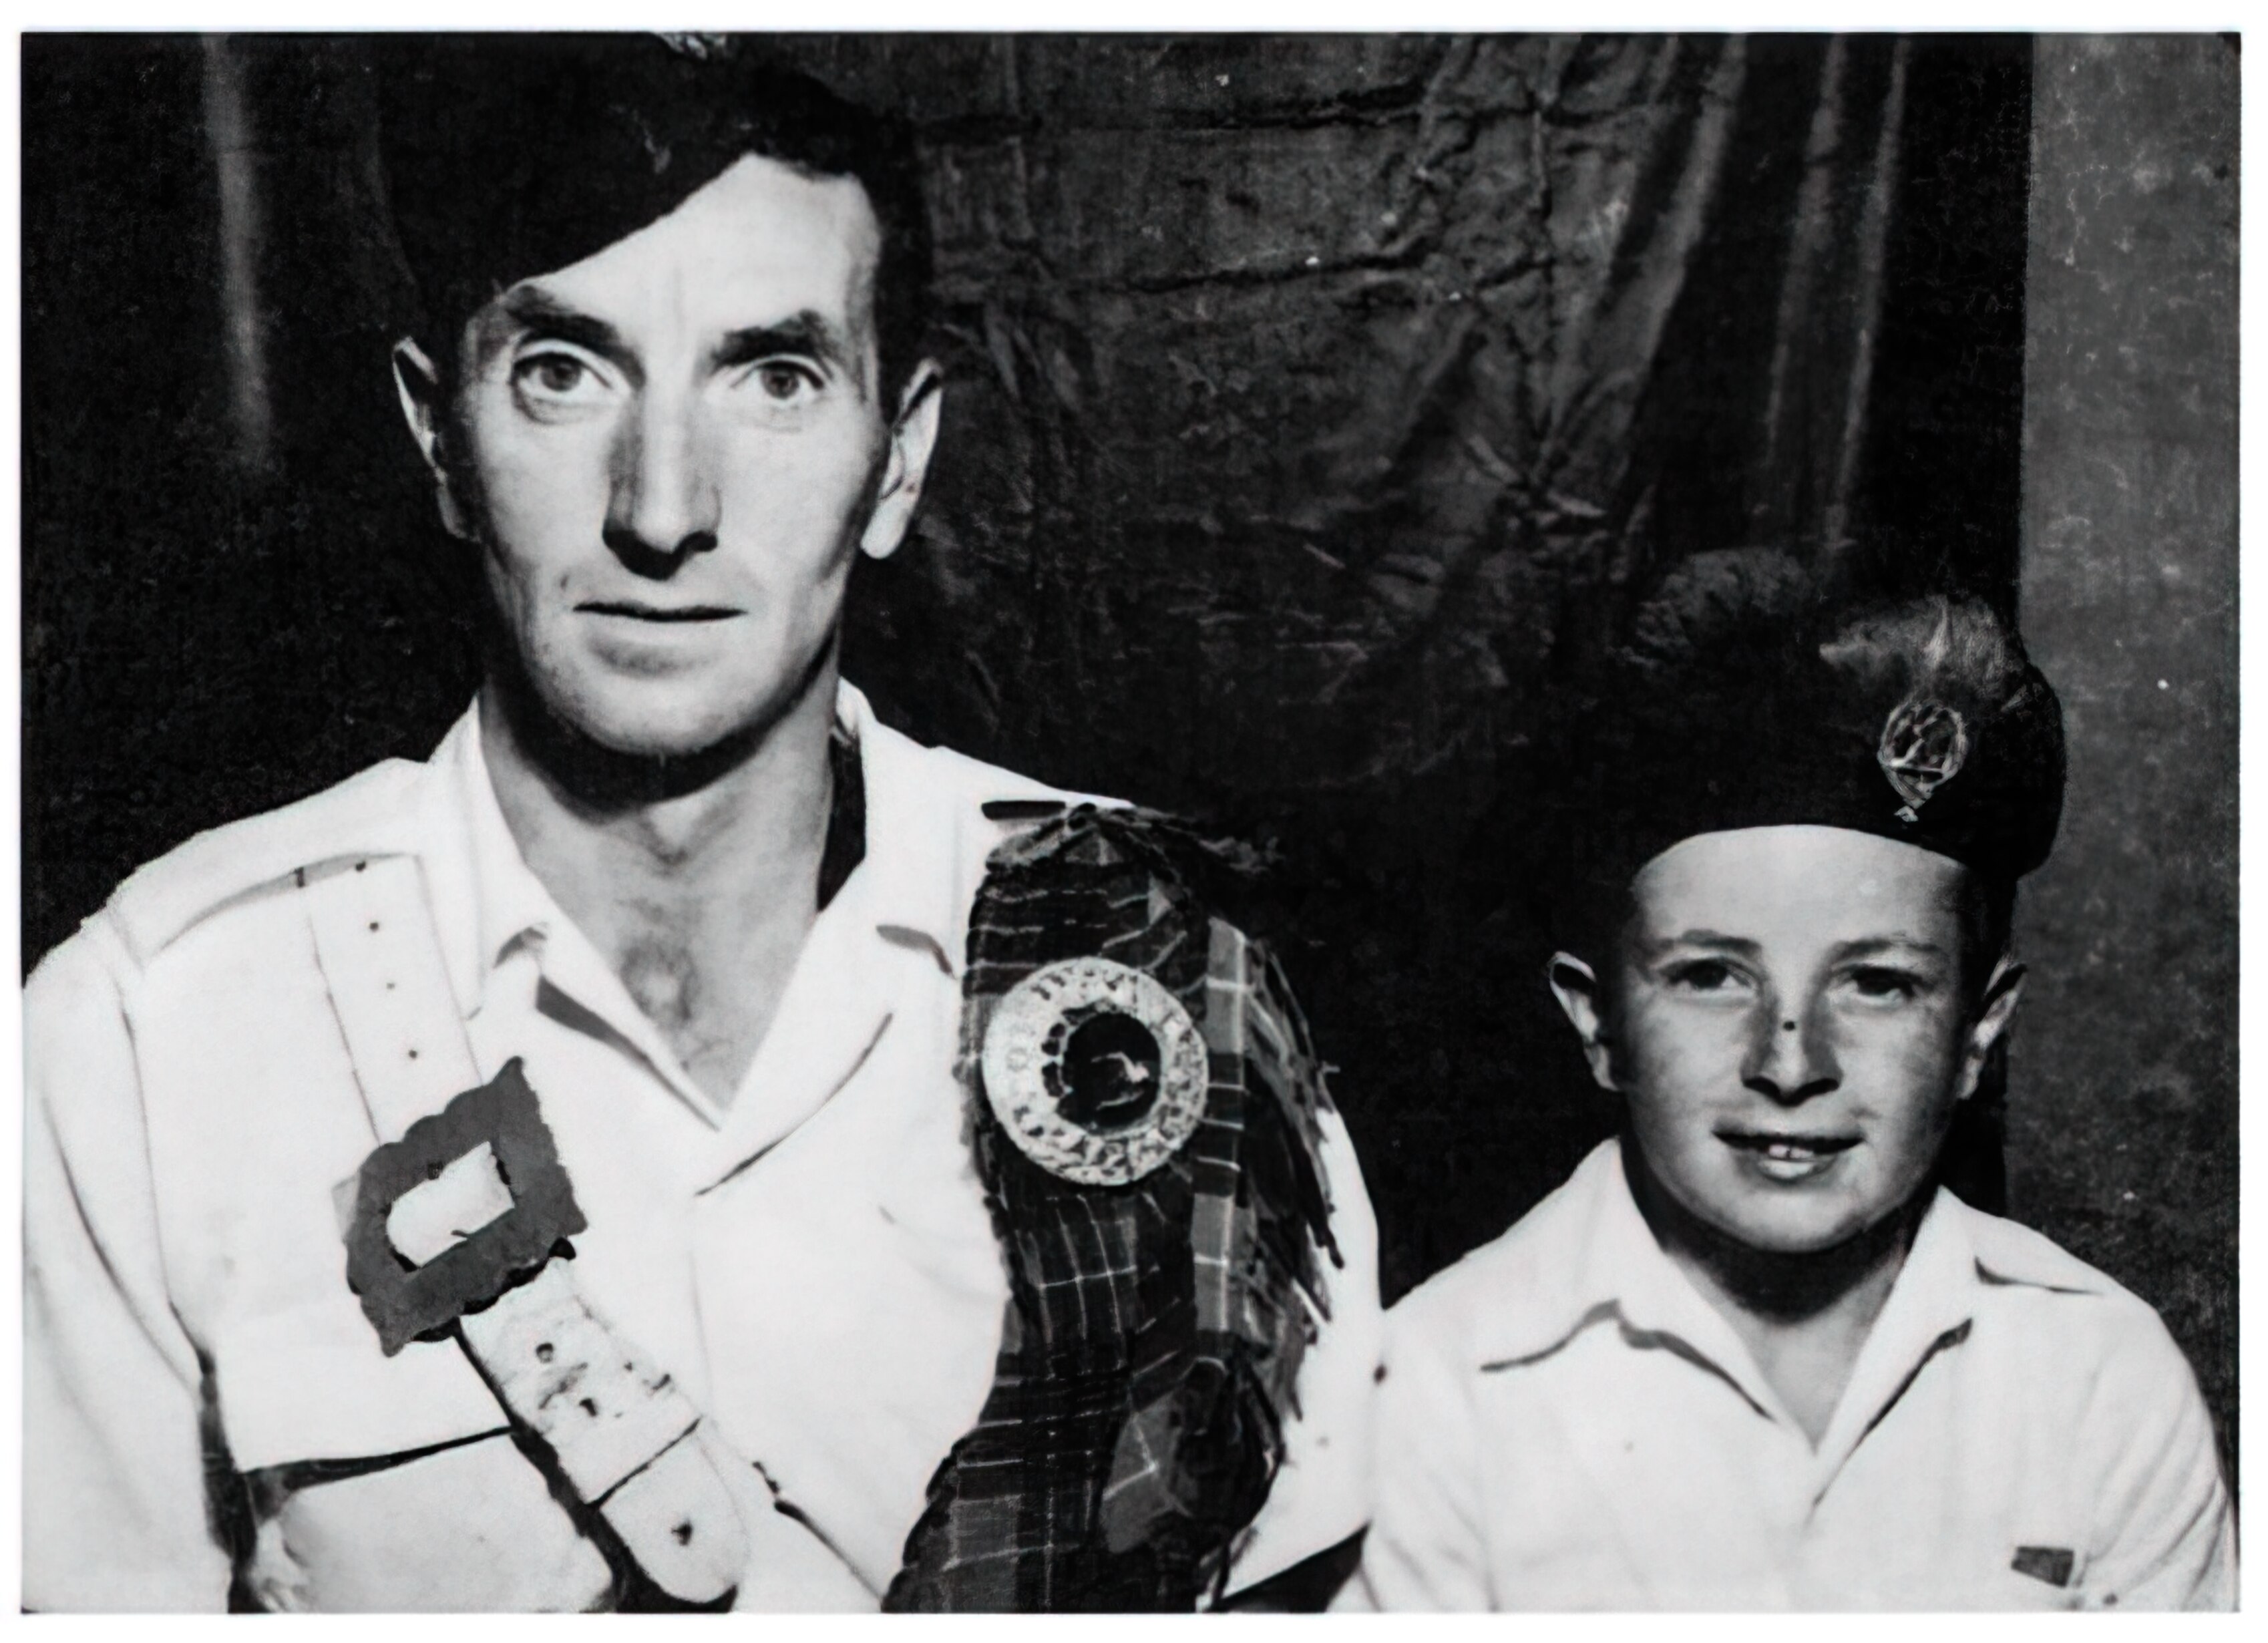 A young Bon Scott (of AC/DC fame) with his father, Charles Belford Scott, both wearing Scottish pipe band uniforms.